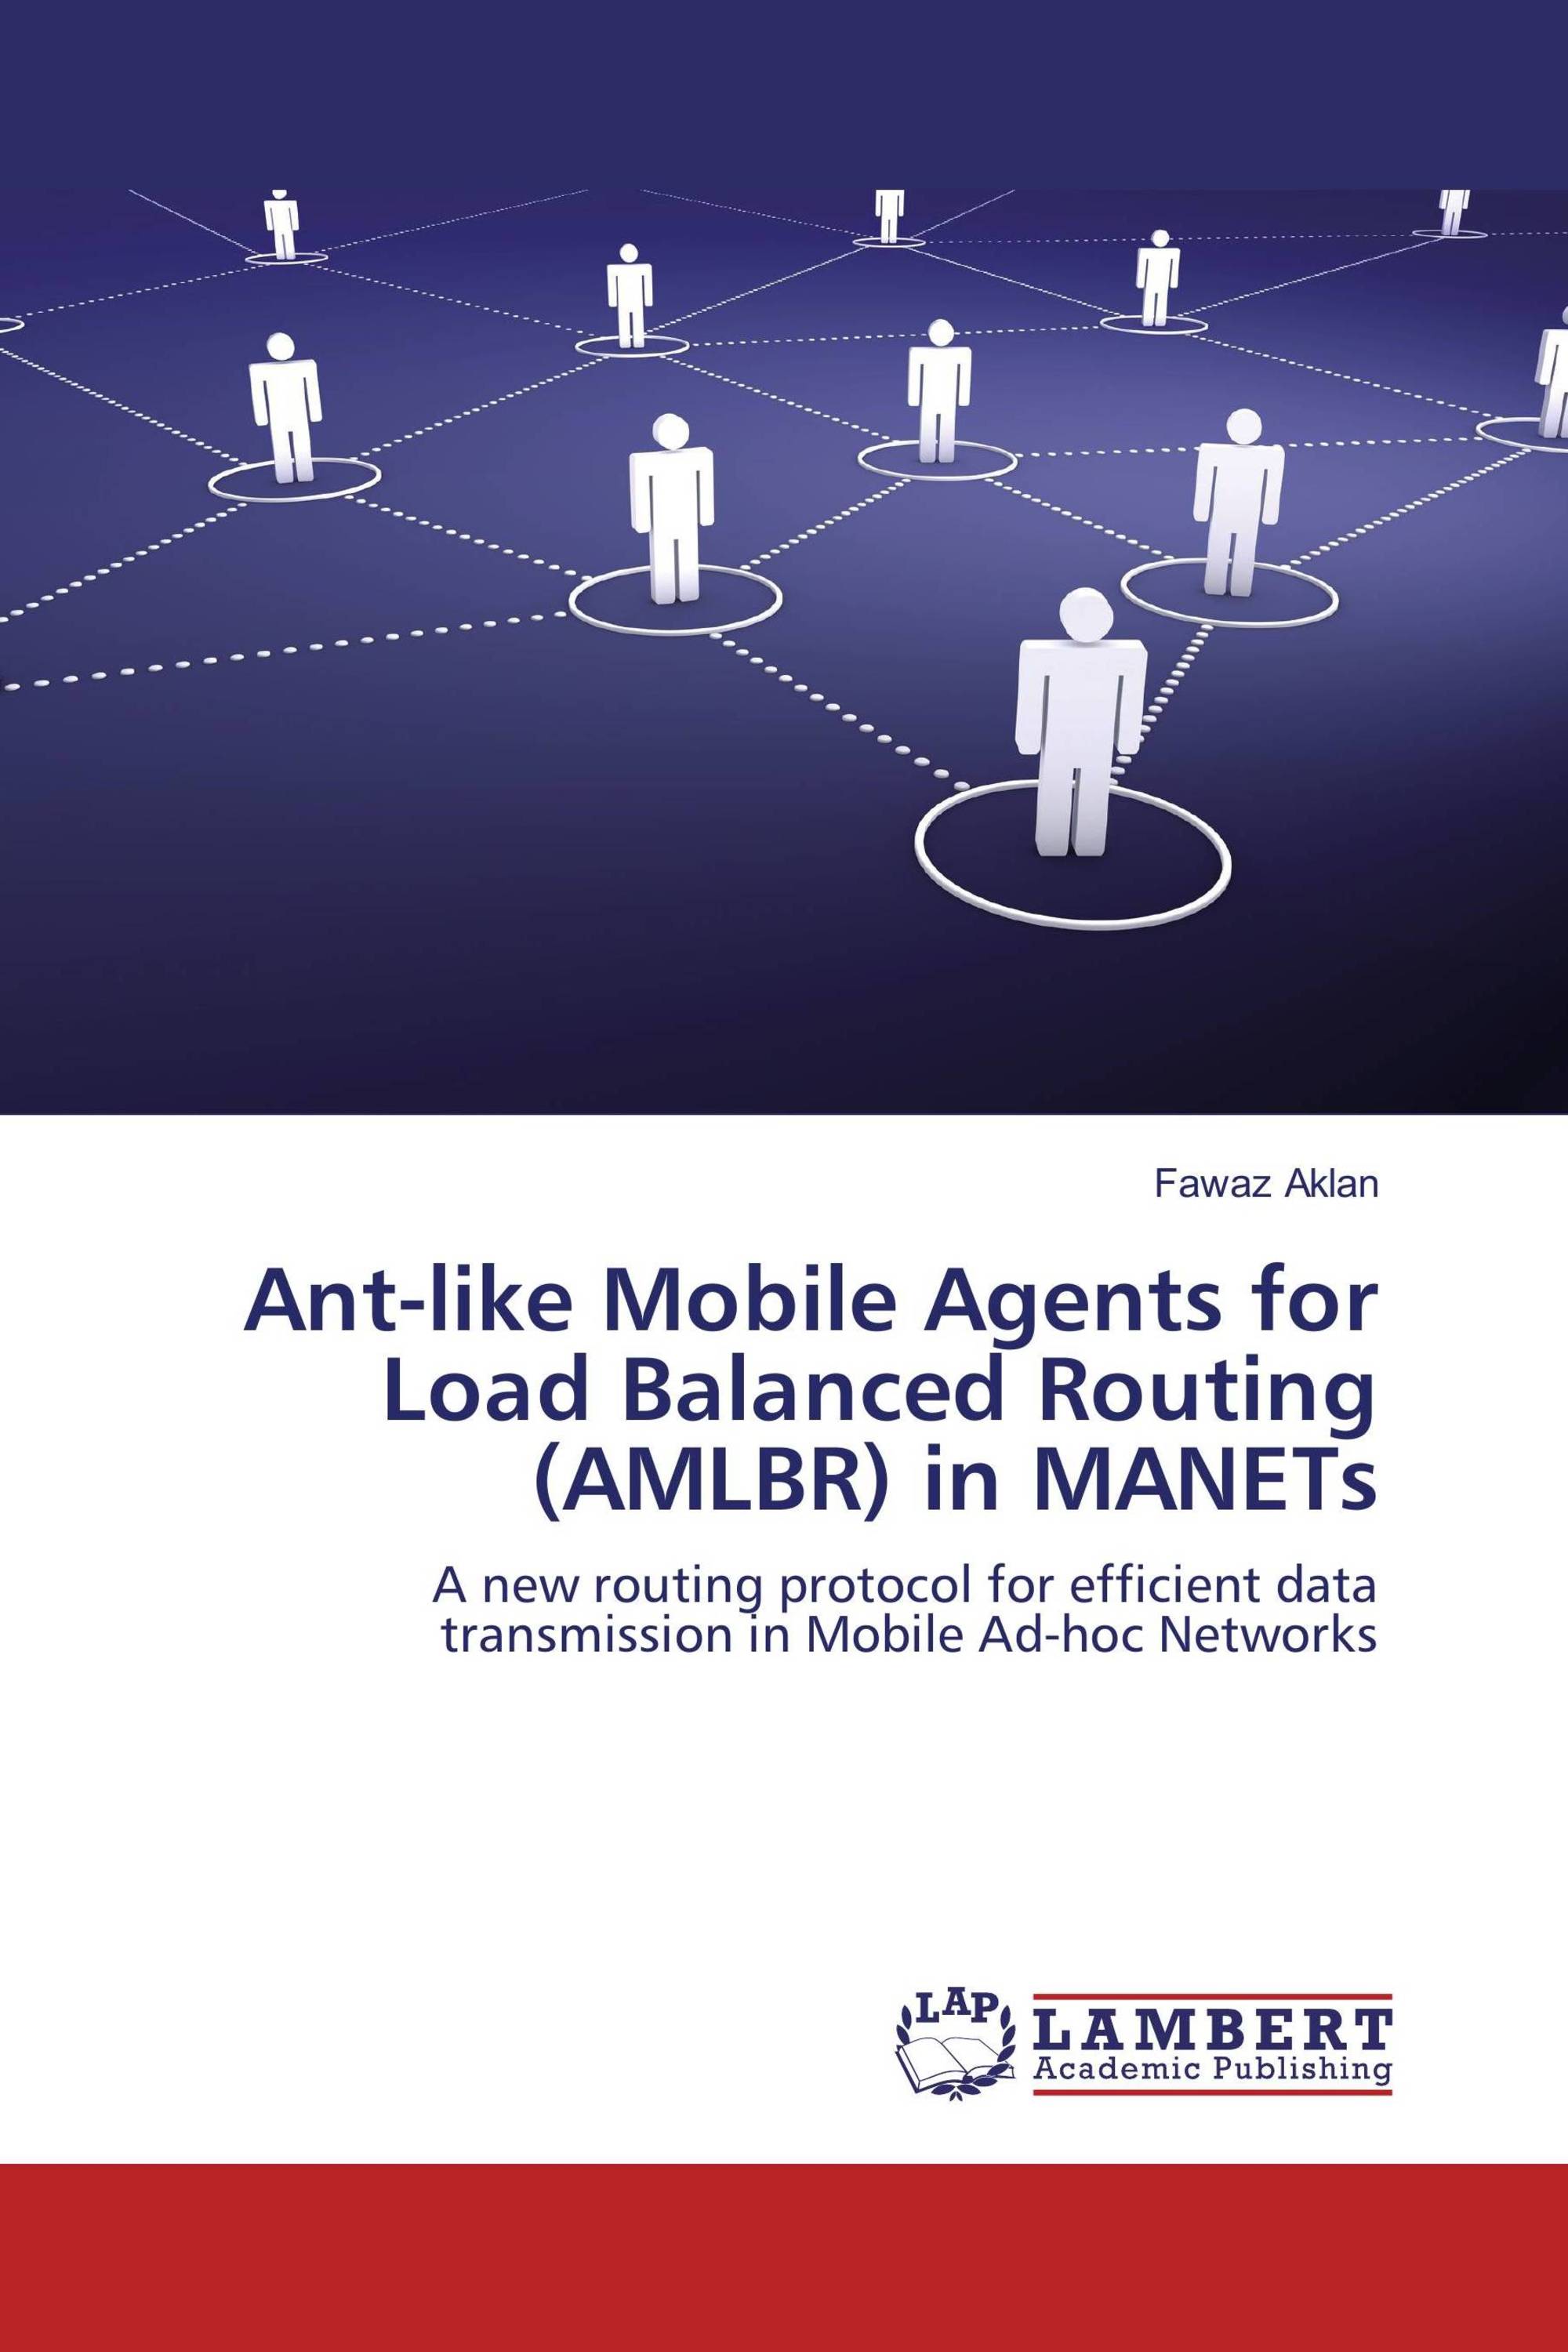 Ant-like Mobile Agents for Load Balanced Routing (AMLBR) in MANETs